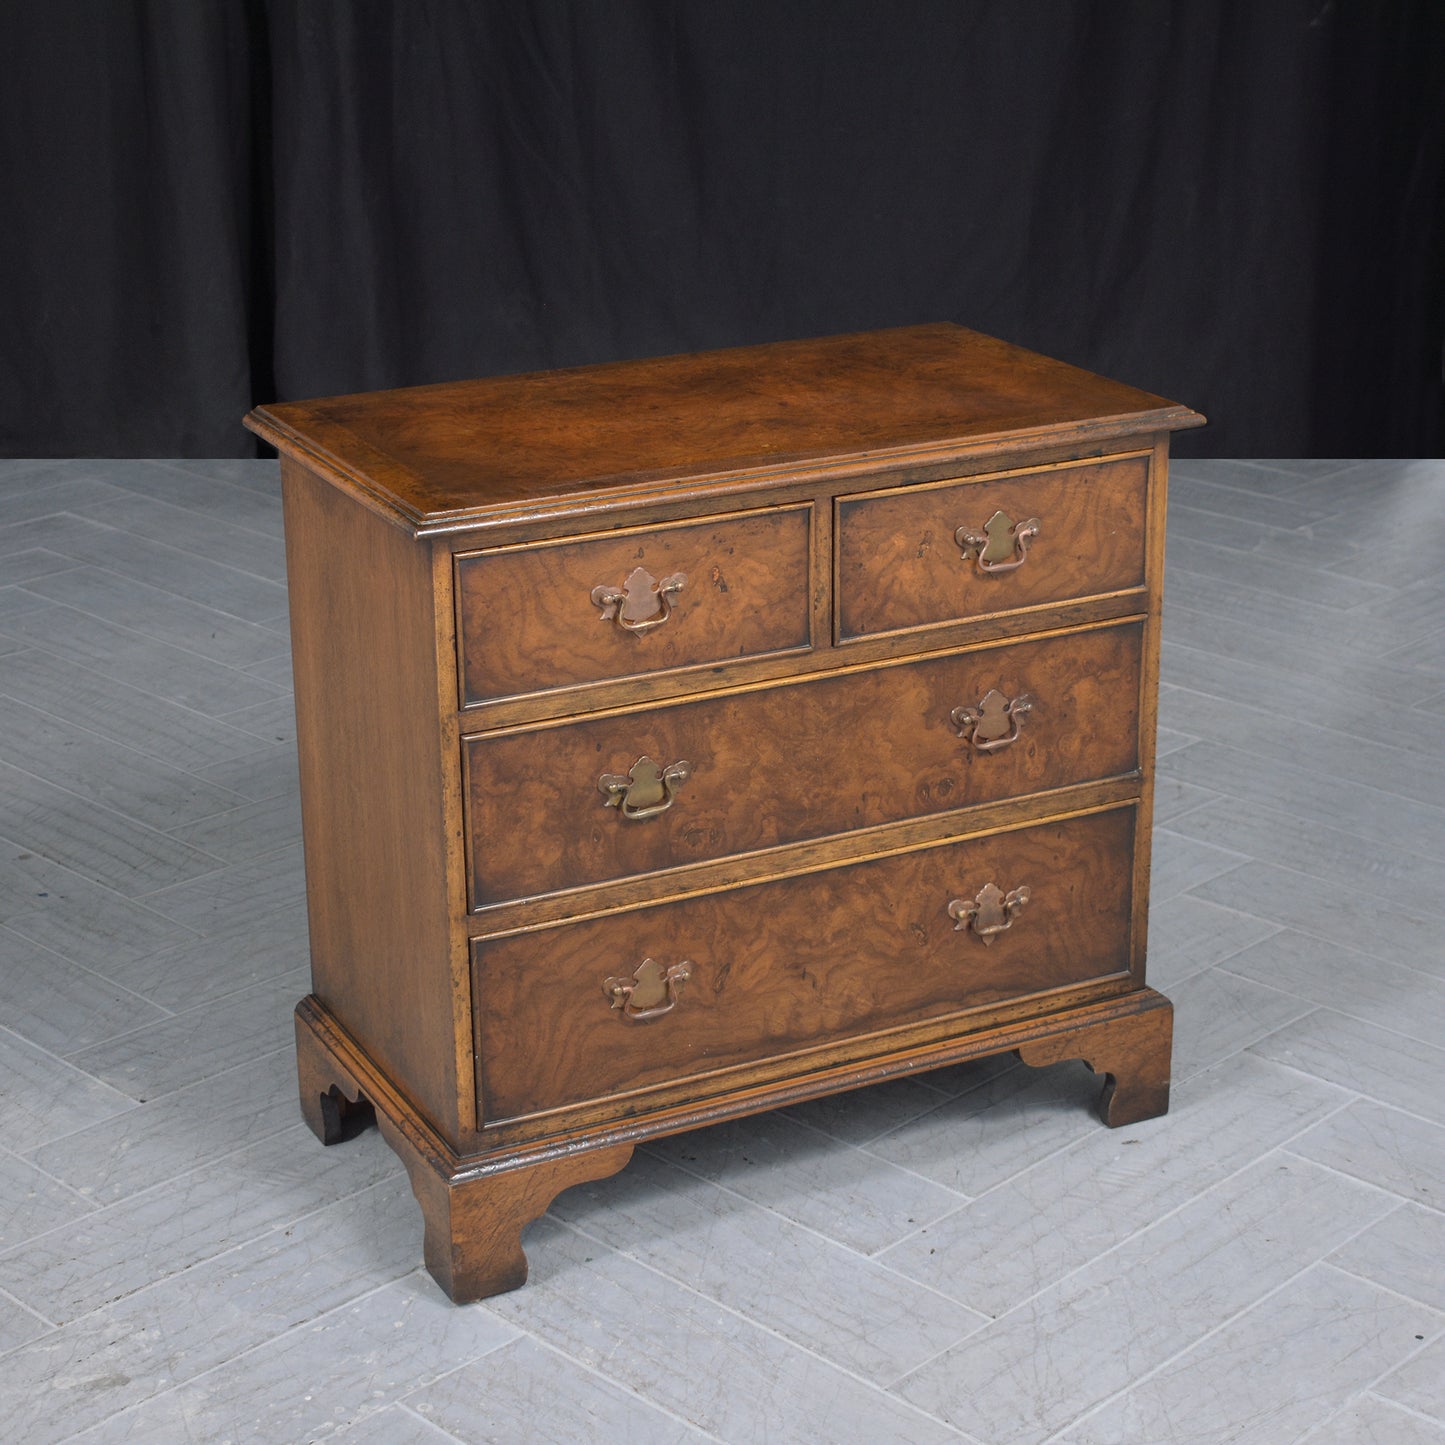 Restored Early 1950s Burled Veneers Chest of Drawers: A Vintage Patina Finish